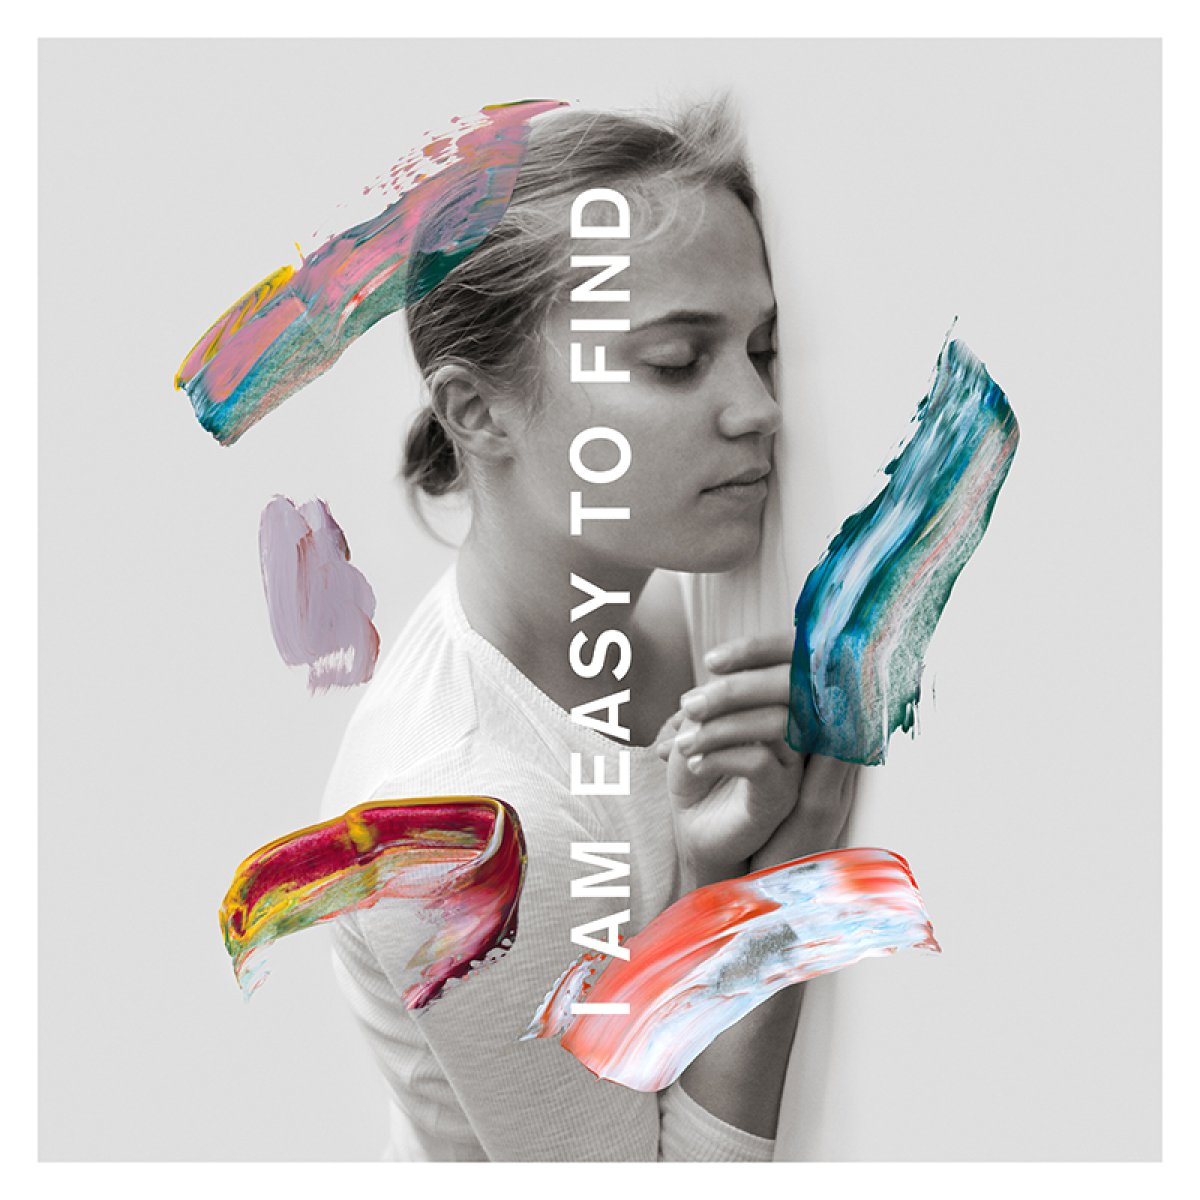 'I am easy to find' - The National